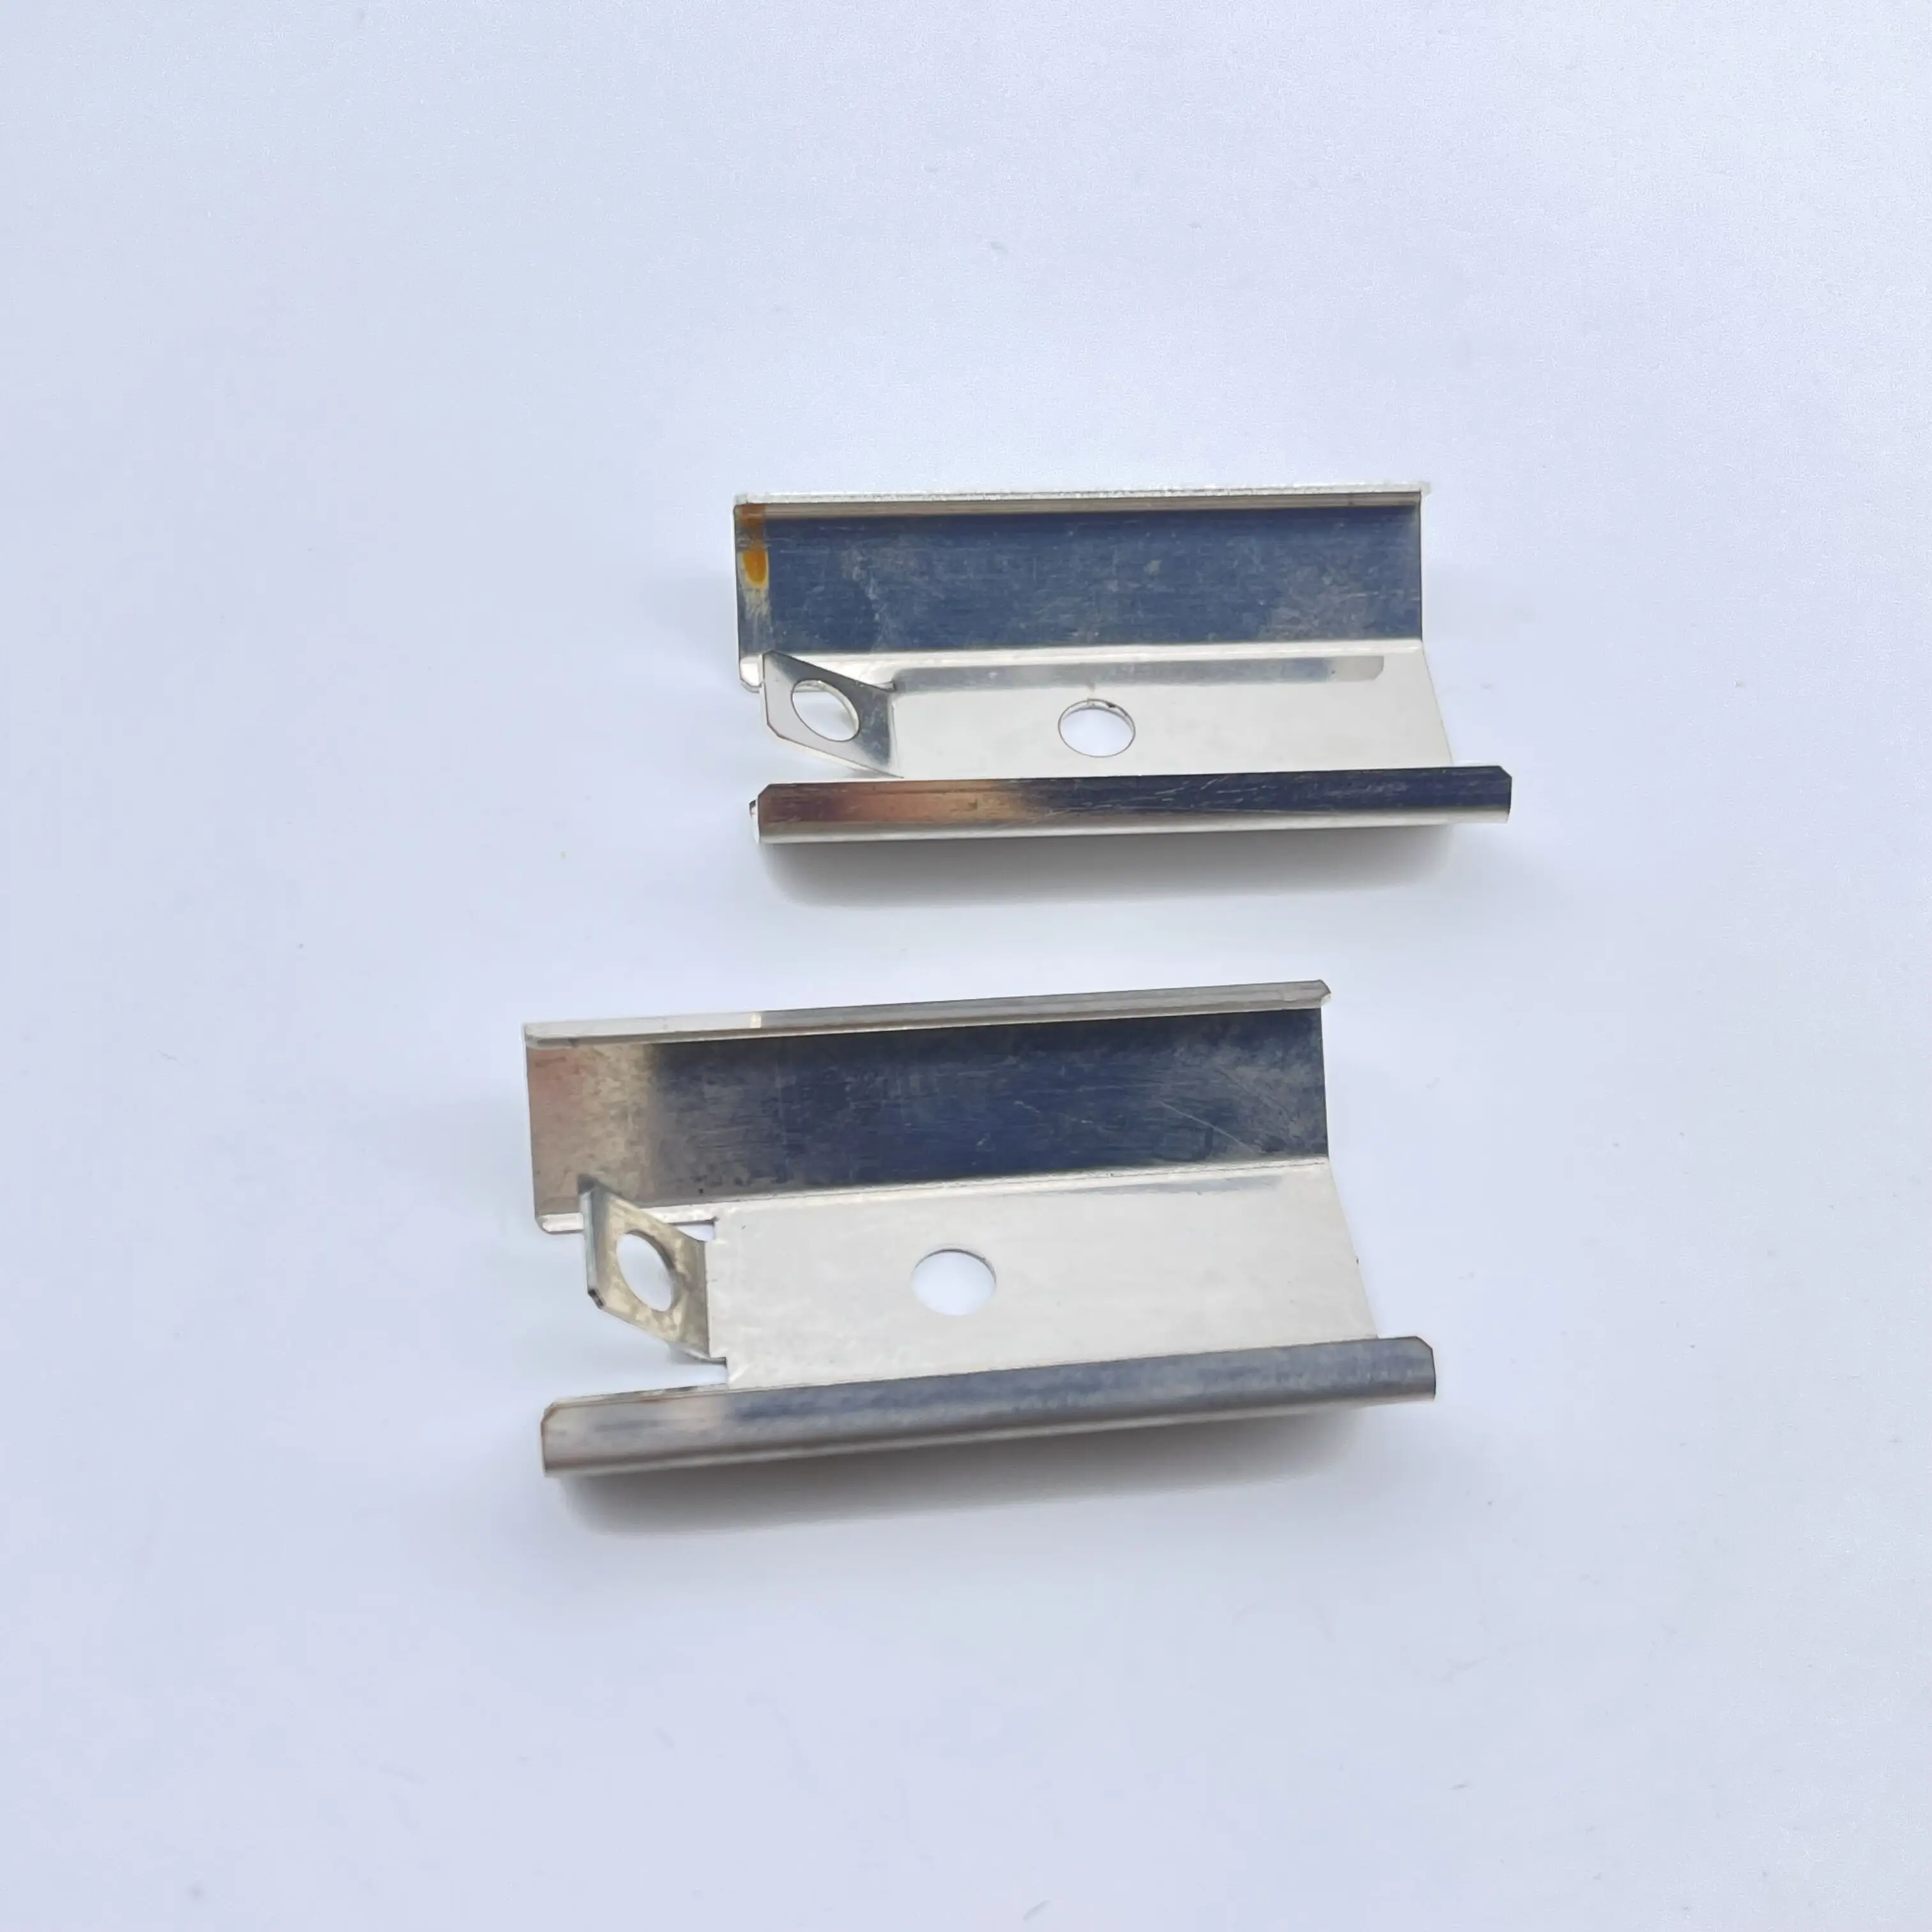 Metal Parts For Sheet Metal Stamping And Bending Parts Sheet Metal Machining Stamping Parts